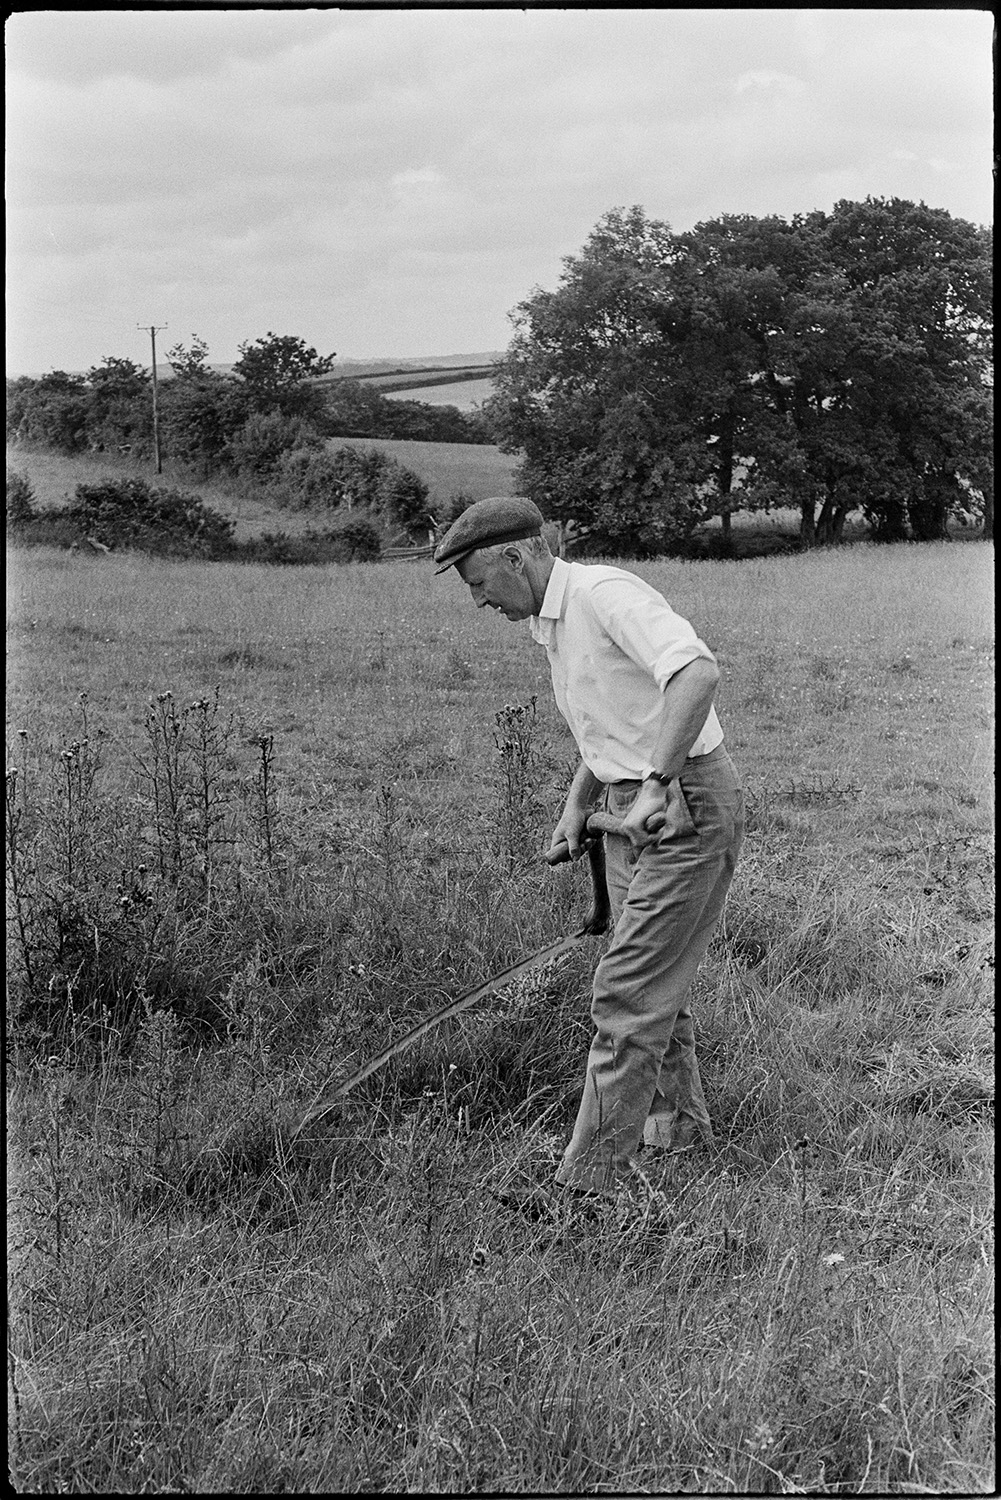 Man scything thistles. 
[A man, possibly Mr Allin, scything thistles in a field on Rectory Road, Dolton. Trees and other fields can be seen in the background.]